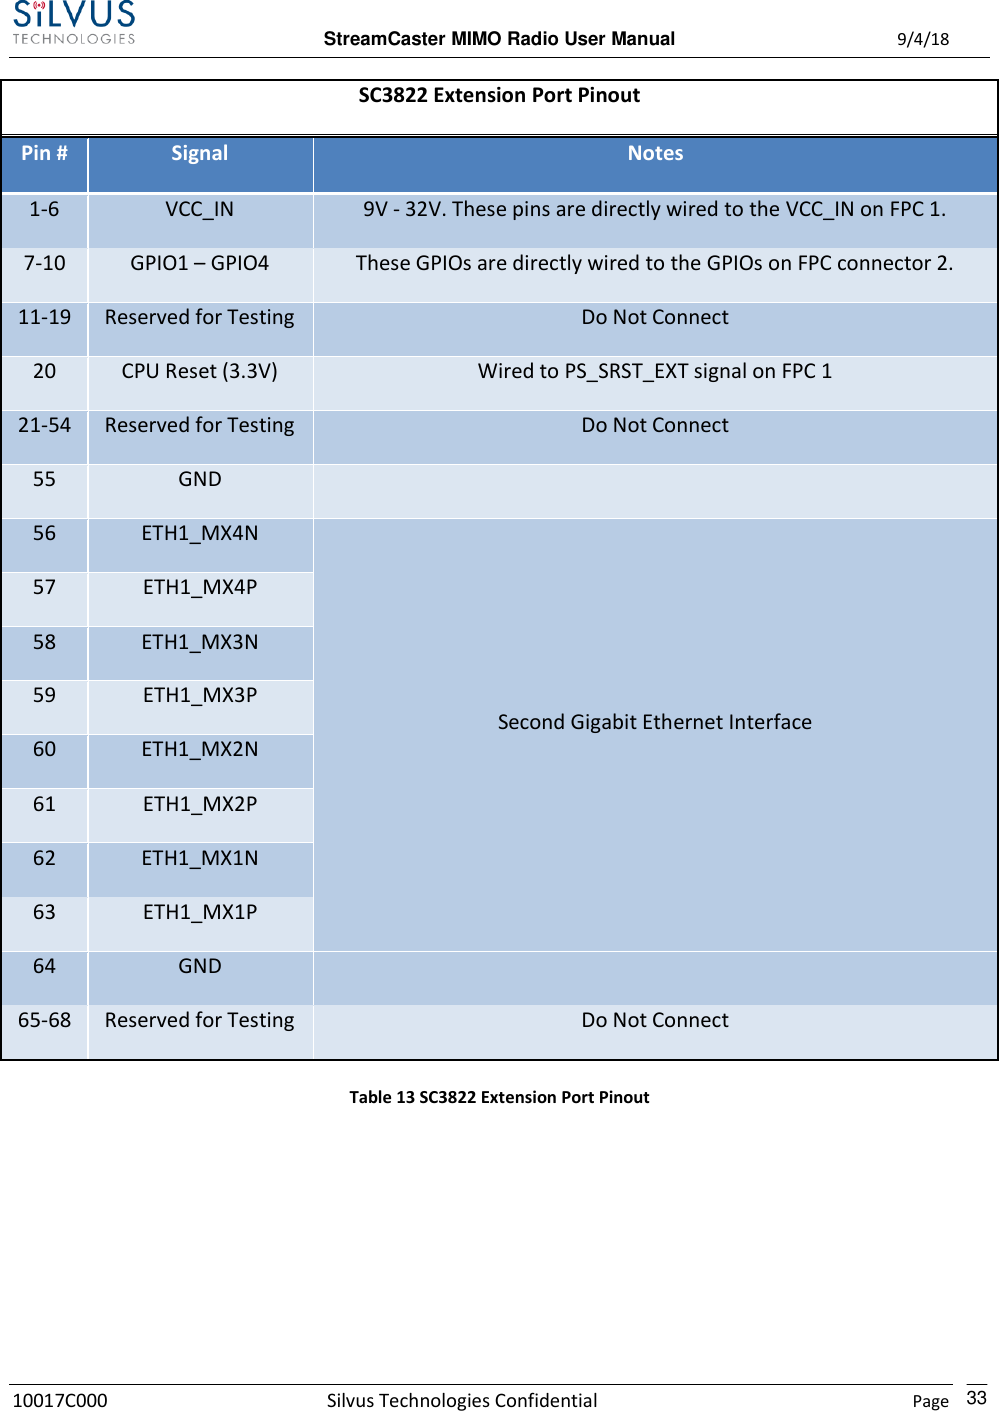  StreamCaster MIMO Radio User Manual  9/4/18 10017C000 Silvus Technologies Confidential    Page    33 SC3822 Extension Port Pinout Pin # Signal Notes 1-6 VCC_IN 9V - 32V. These pins are directly wired to the VCC_IN on FPC 1. 7-10 GPIO1 – GPIO4 These GPIOs are directly wired to the GPIOs on FPC connector 2. 11-19 Reserved for Testing Do Not Connect 20 CPU Reset (3.3V) Wired to PS_SRST_EXT signal on FPC 1 21-54 Reserved for Testing Do Not Connect 55 GND  56 ETH1_MX4N Second Gigabit Ethernet Interface 57 ETH1_MX4P 58 ETH1_MX3N 59 ETH1_MX3P 60 ETH1_MX2N 61 ETH1_MX2P 62 ETH1_MX1N 63 ETH1_MX1P 64 GND  65-68 Reserved for Testing Do Not Connect Table 13 SC3822 Extension Port Pinout 